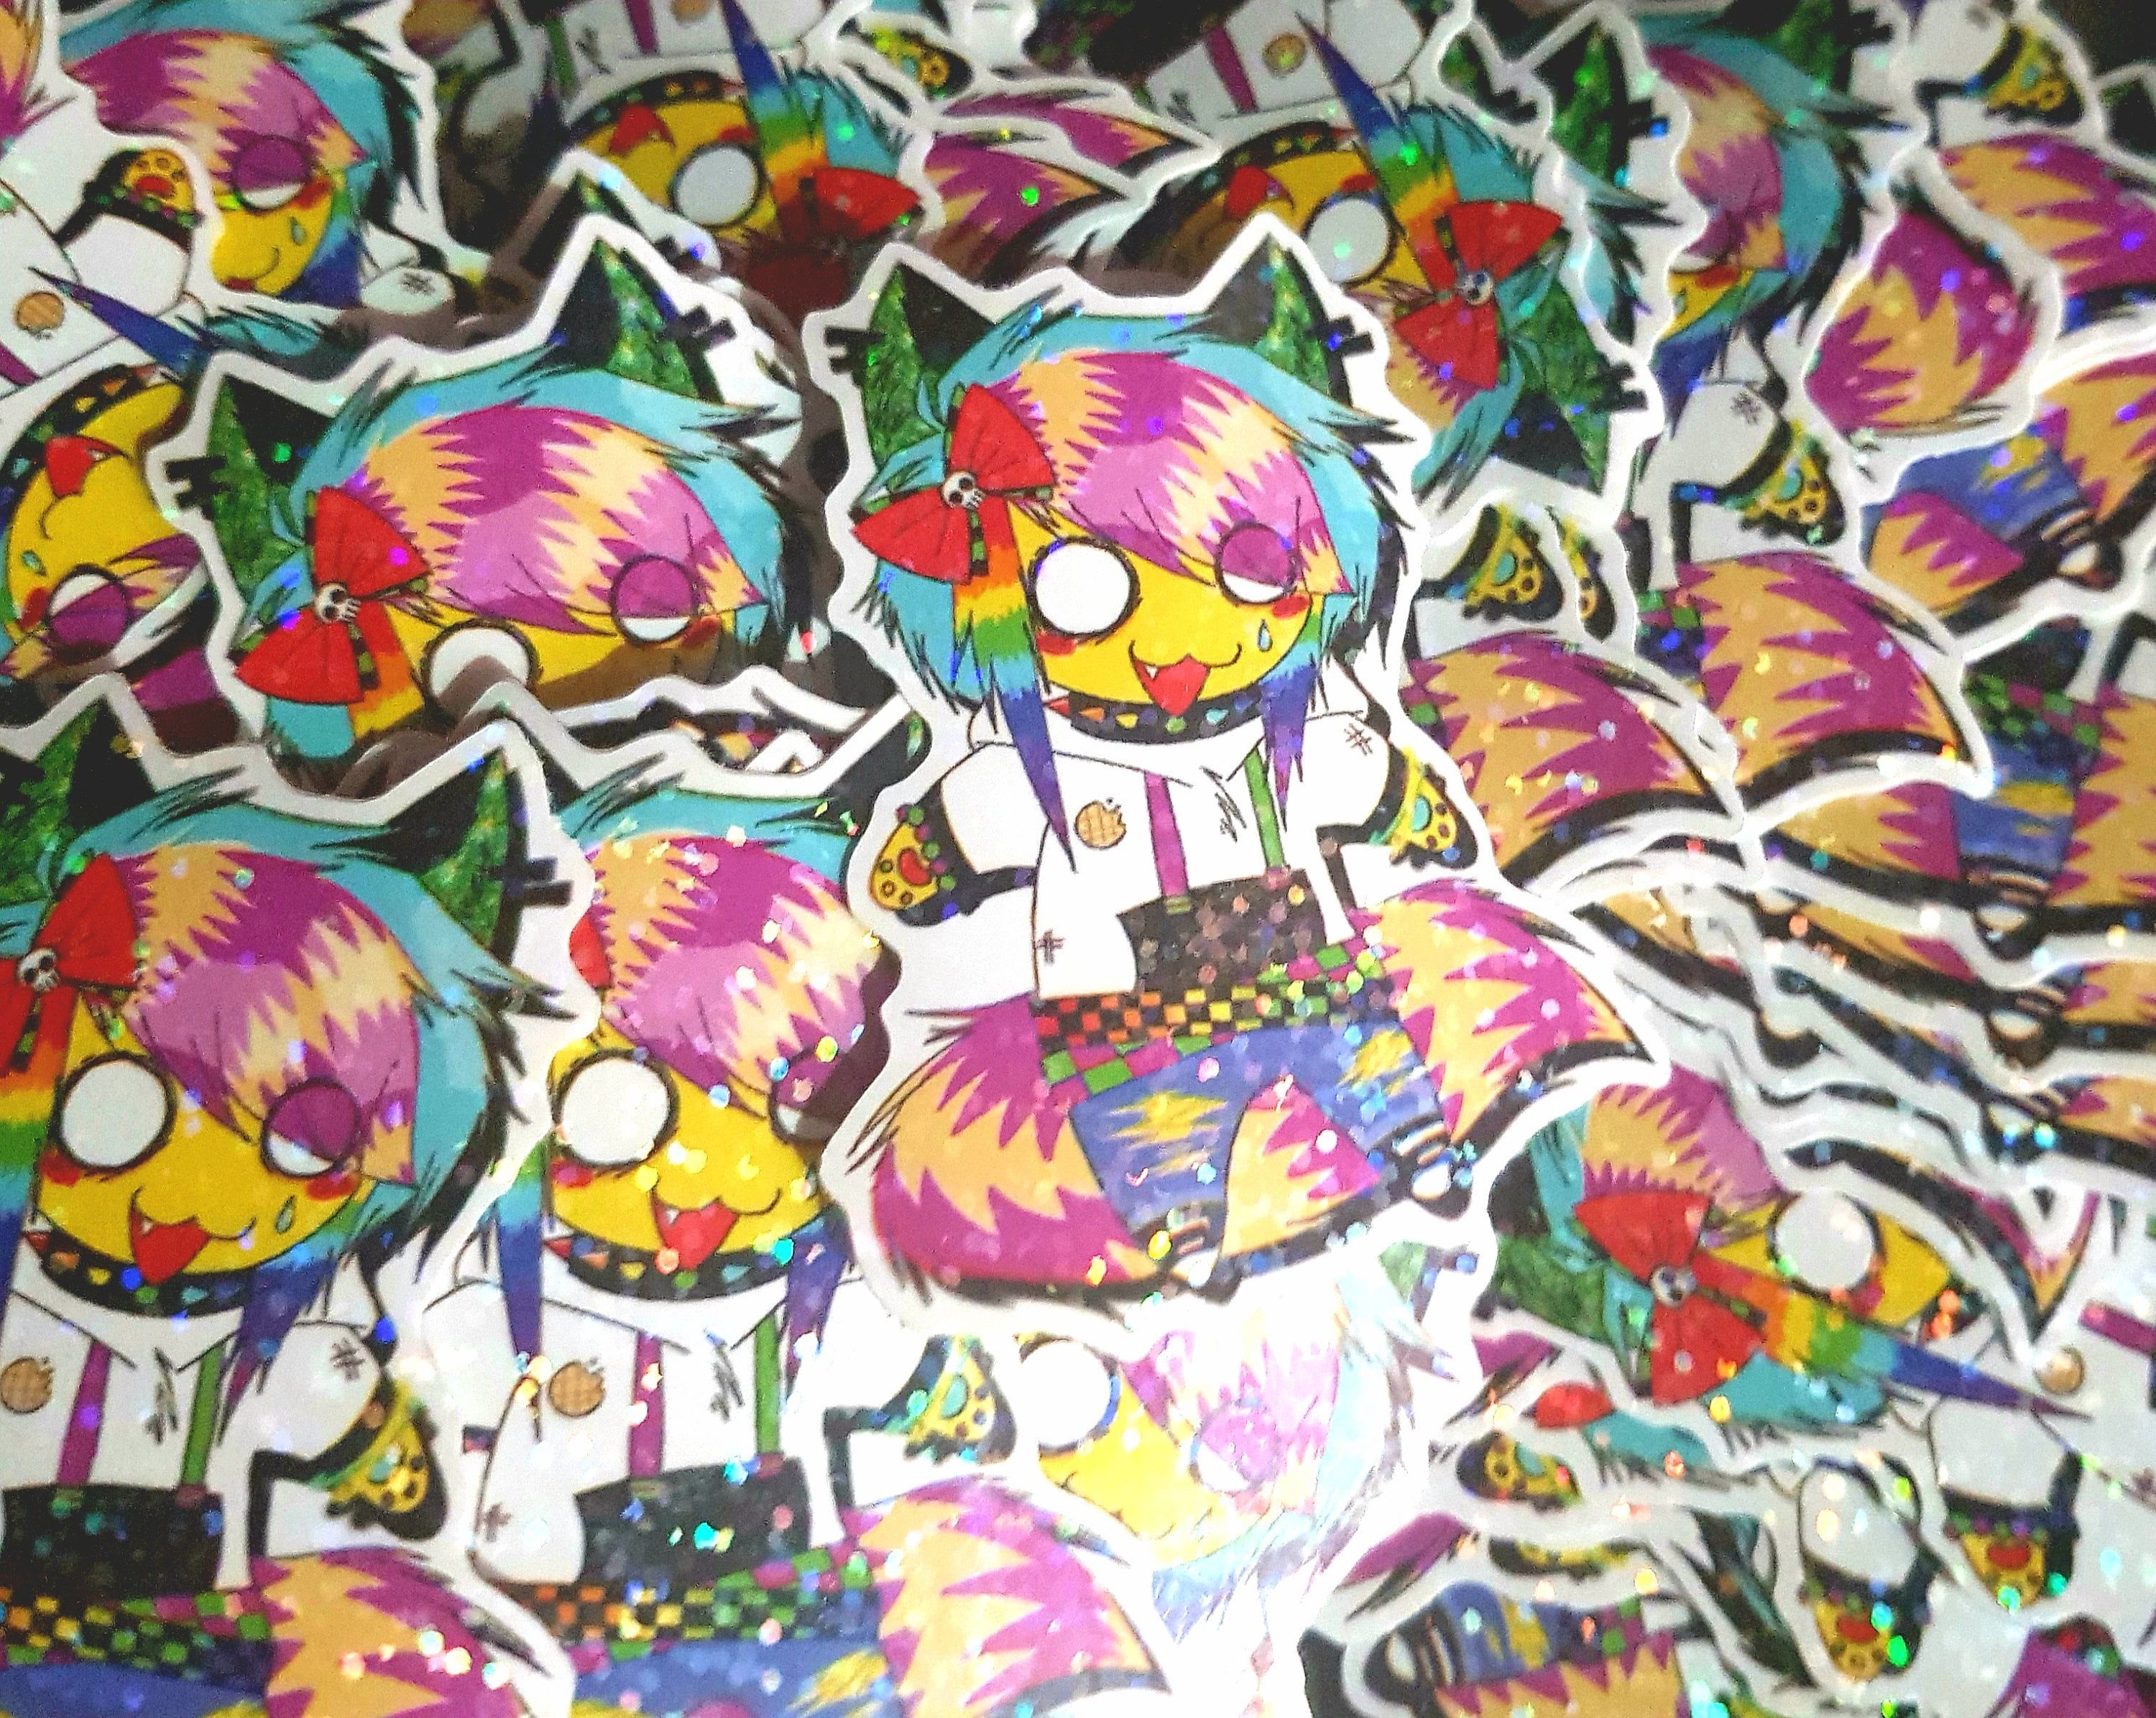 A pile of holographic stickers with a colorful character on it. - Scenecore